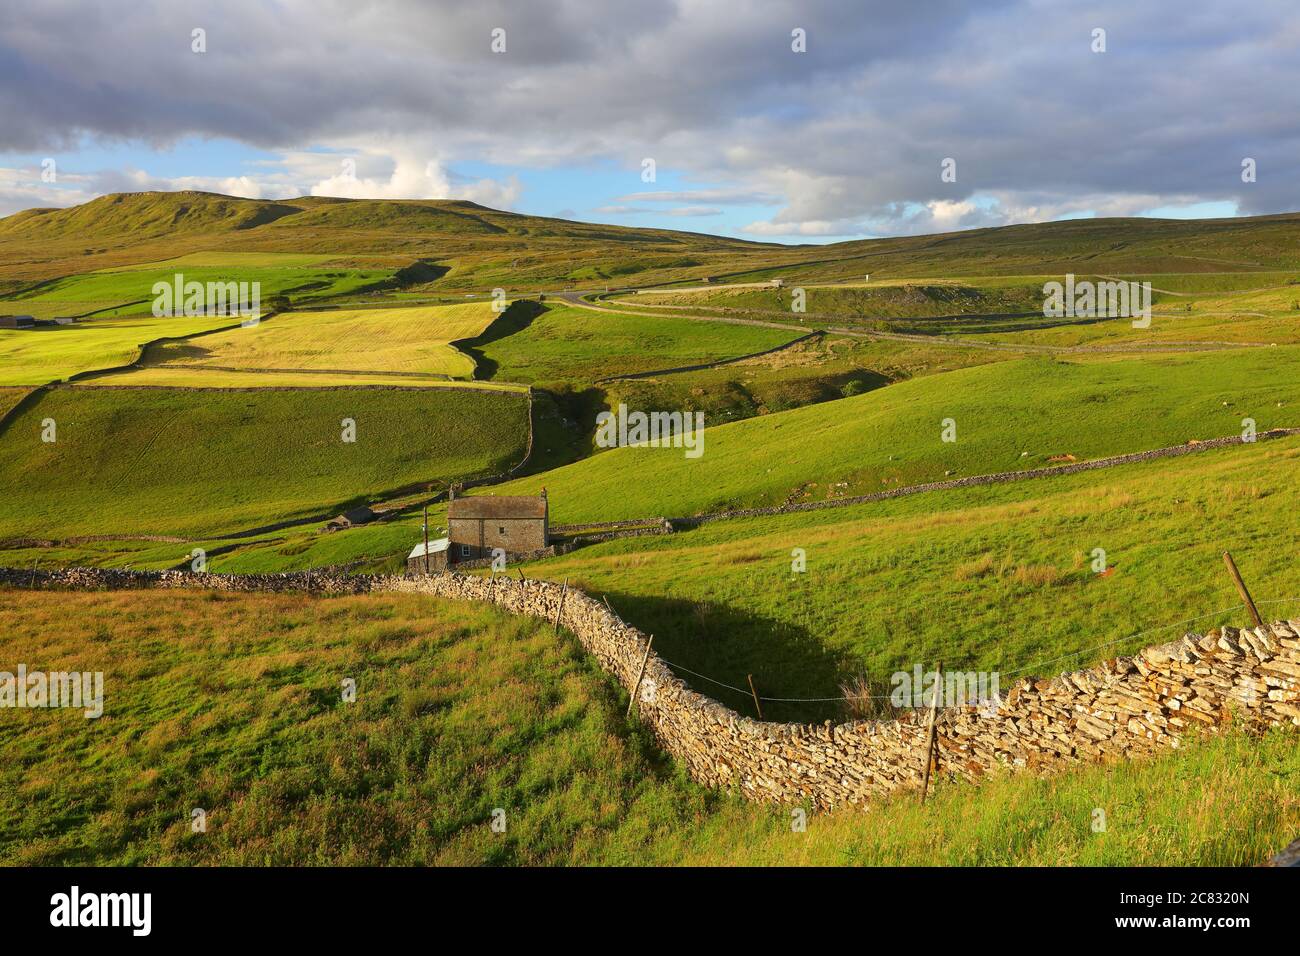 Scenic view of a dry stone wall and fields on a hillside at Stainmore, Pennines, Cumbria, England, UK Stock Photo